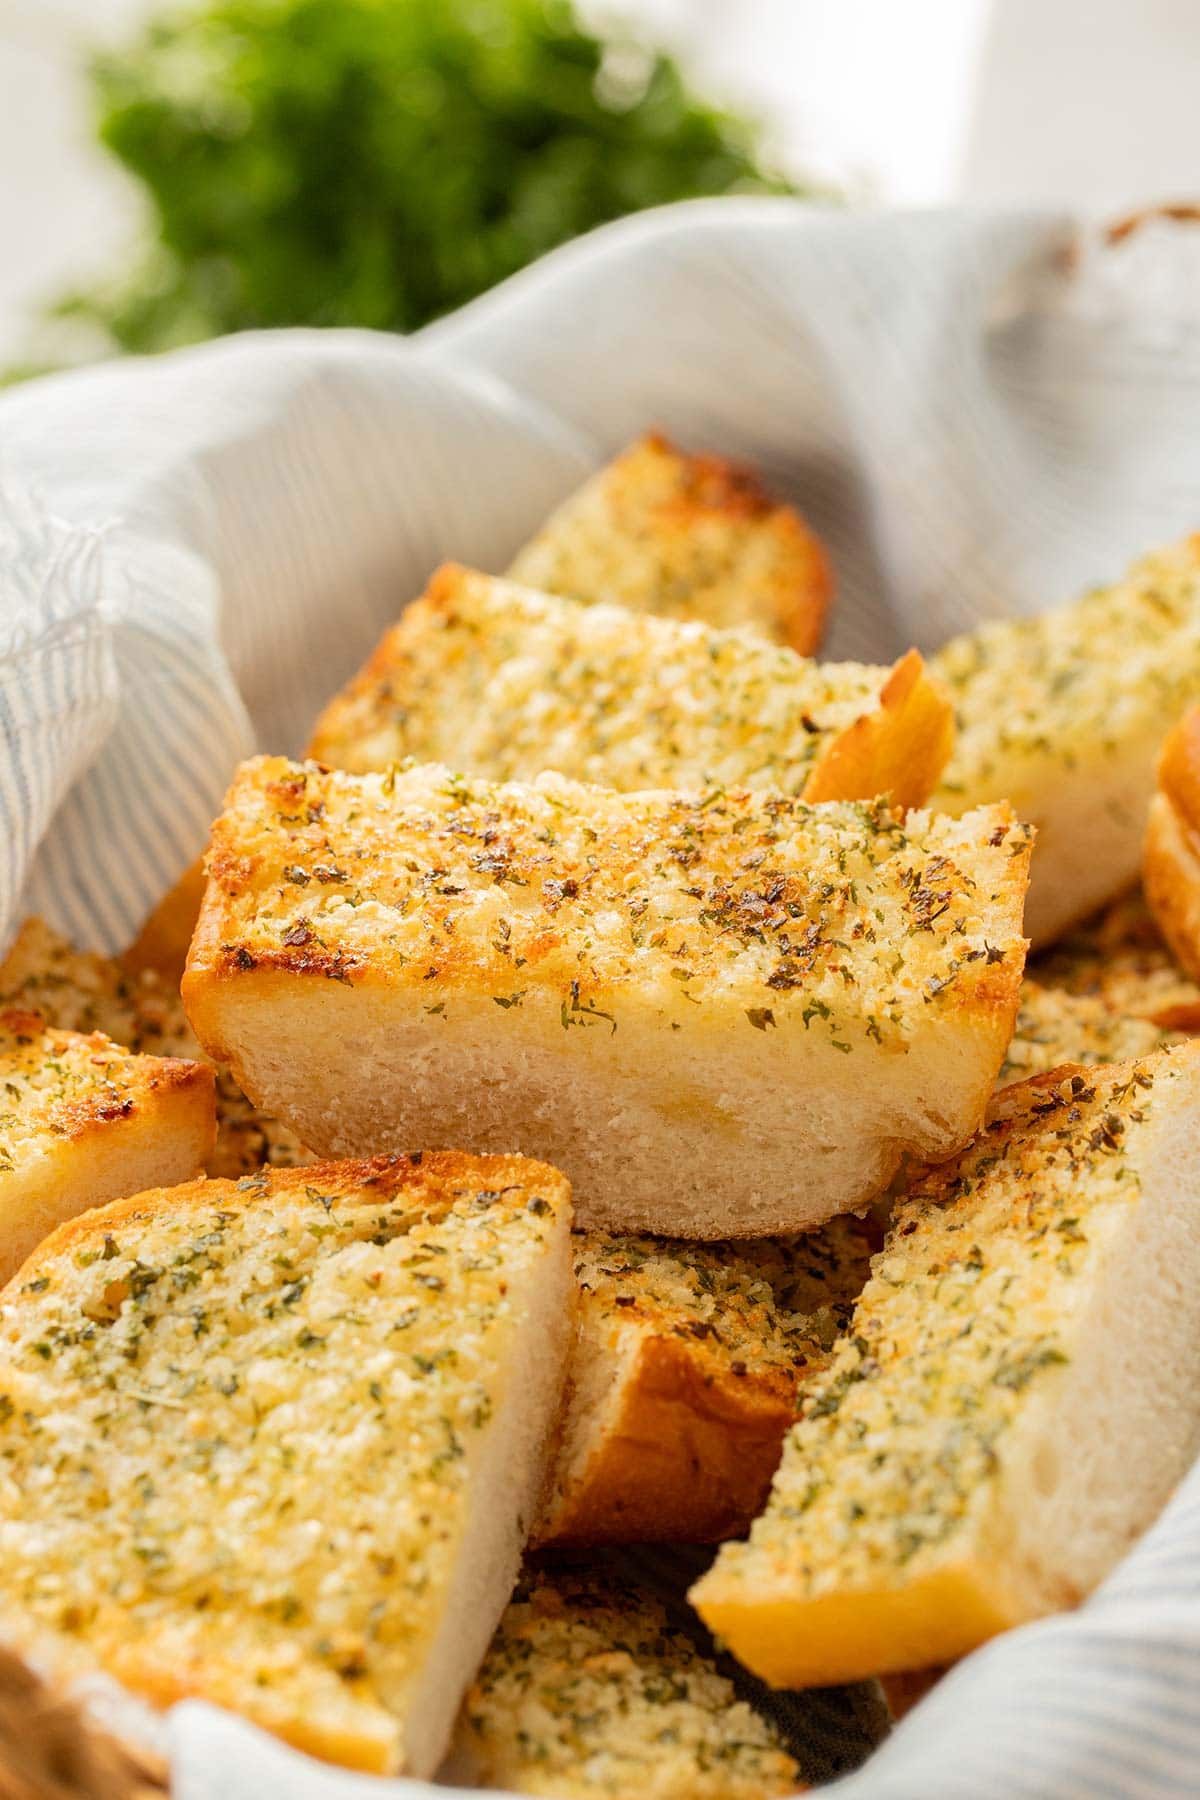 Slices of make-ahead freezer garlic bread in a basket on a table.